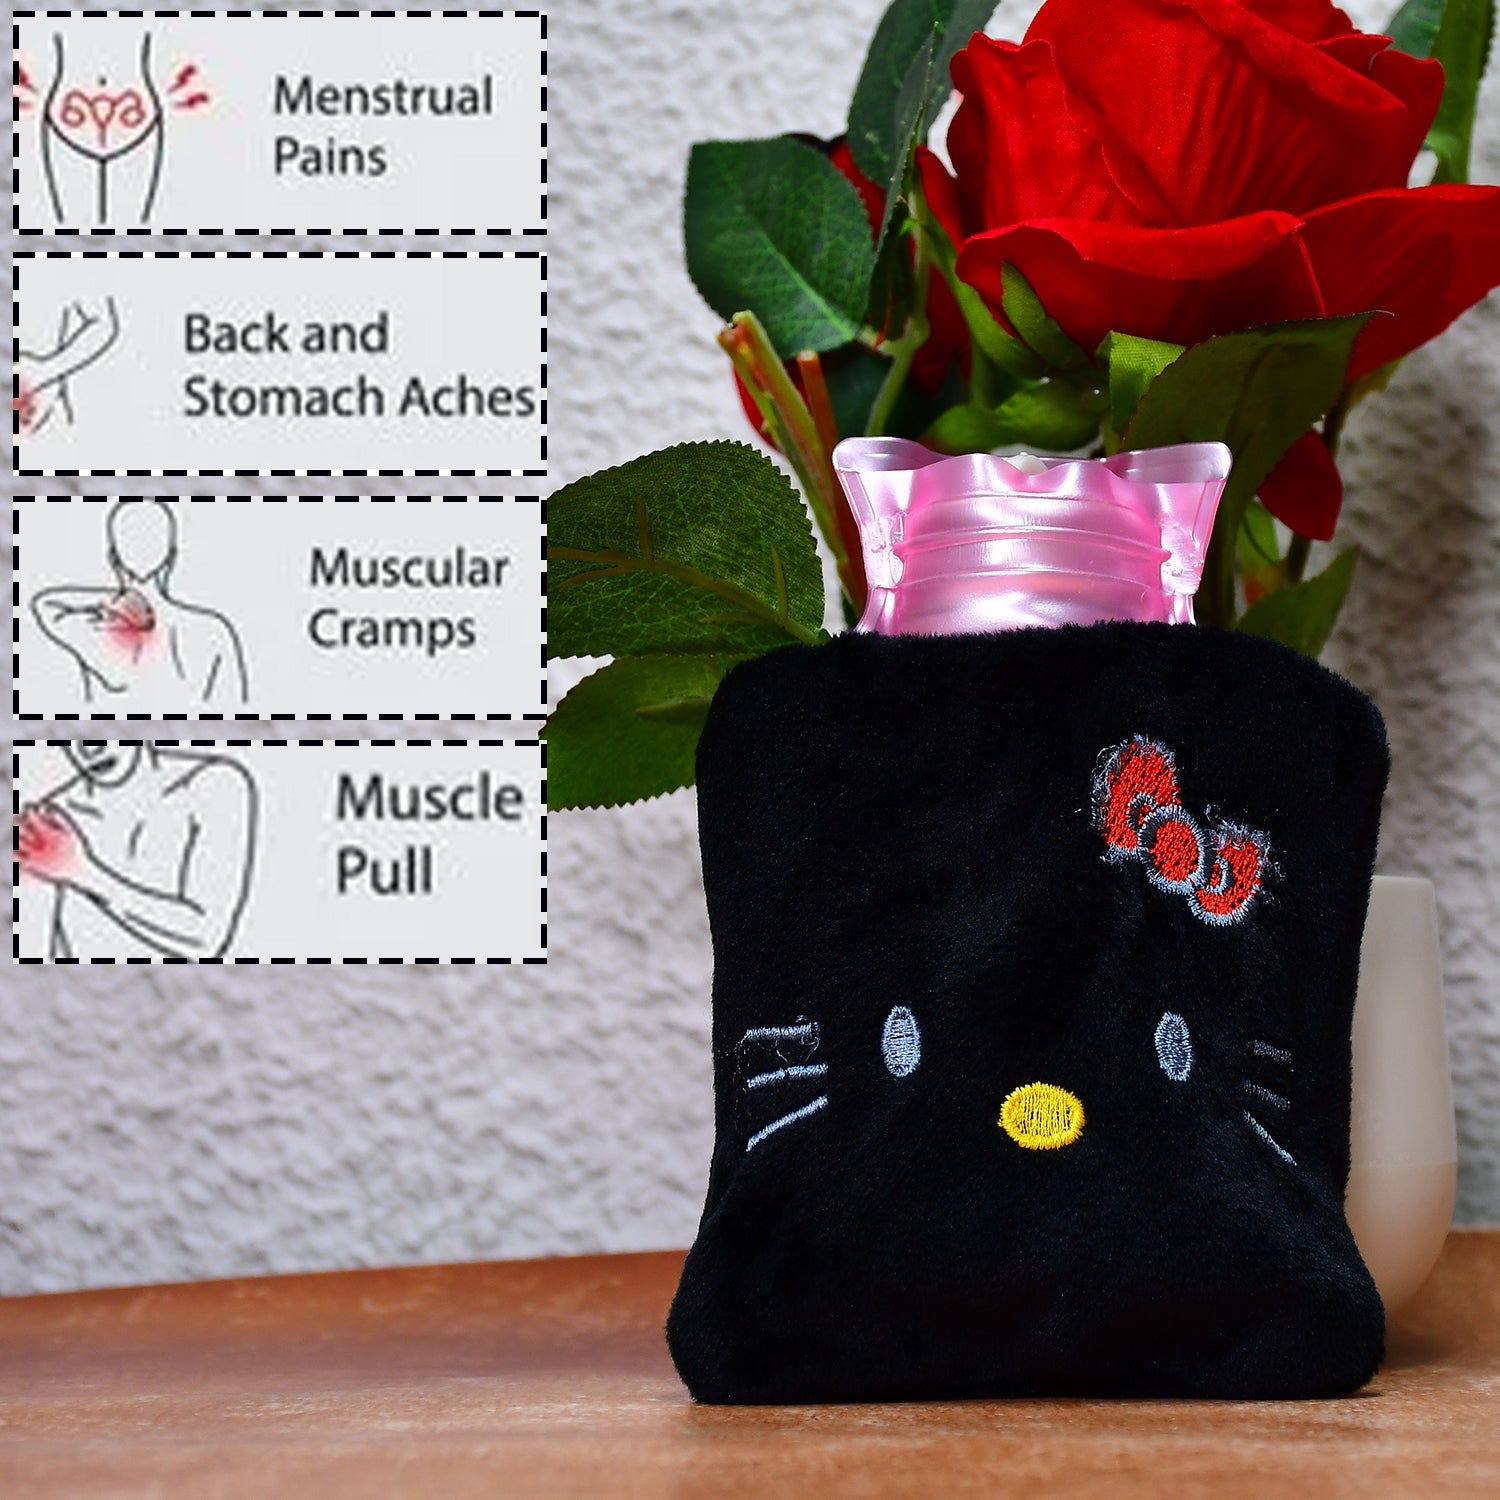 6513 Black Hello Kitty small Hot Water Bag with Cover for Pain Relief, Neck, Shoulder Pain and Hand, Feet Warmer, Menstrual Cramps. 